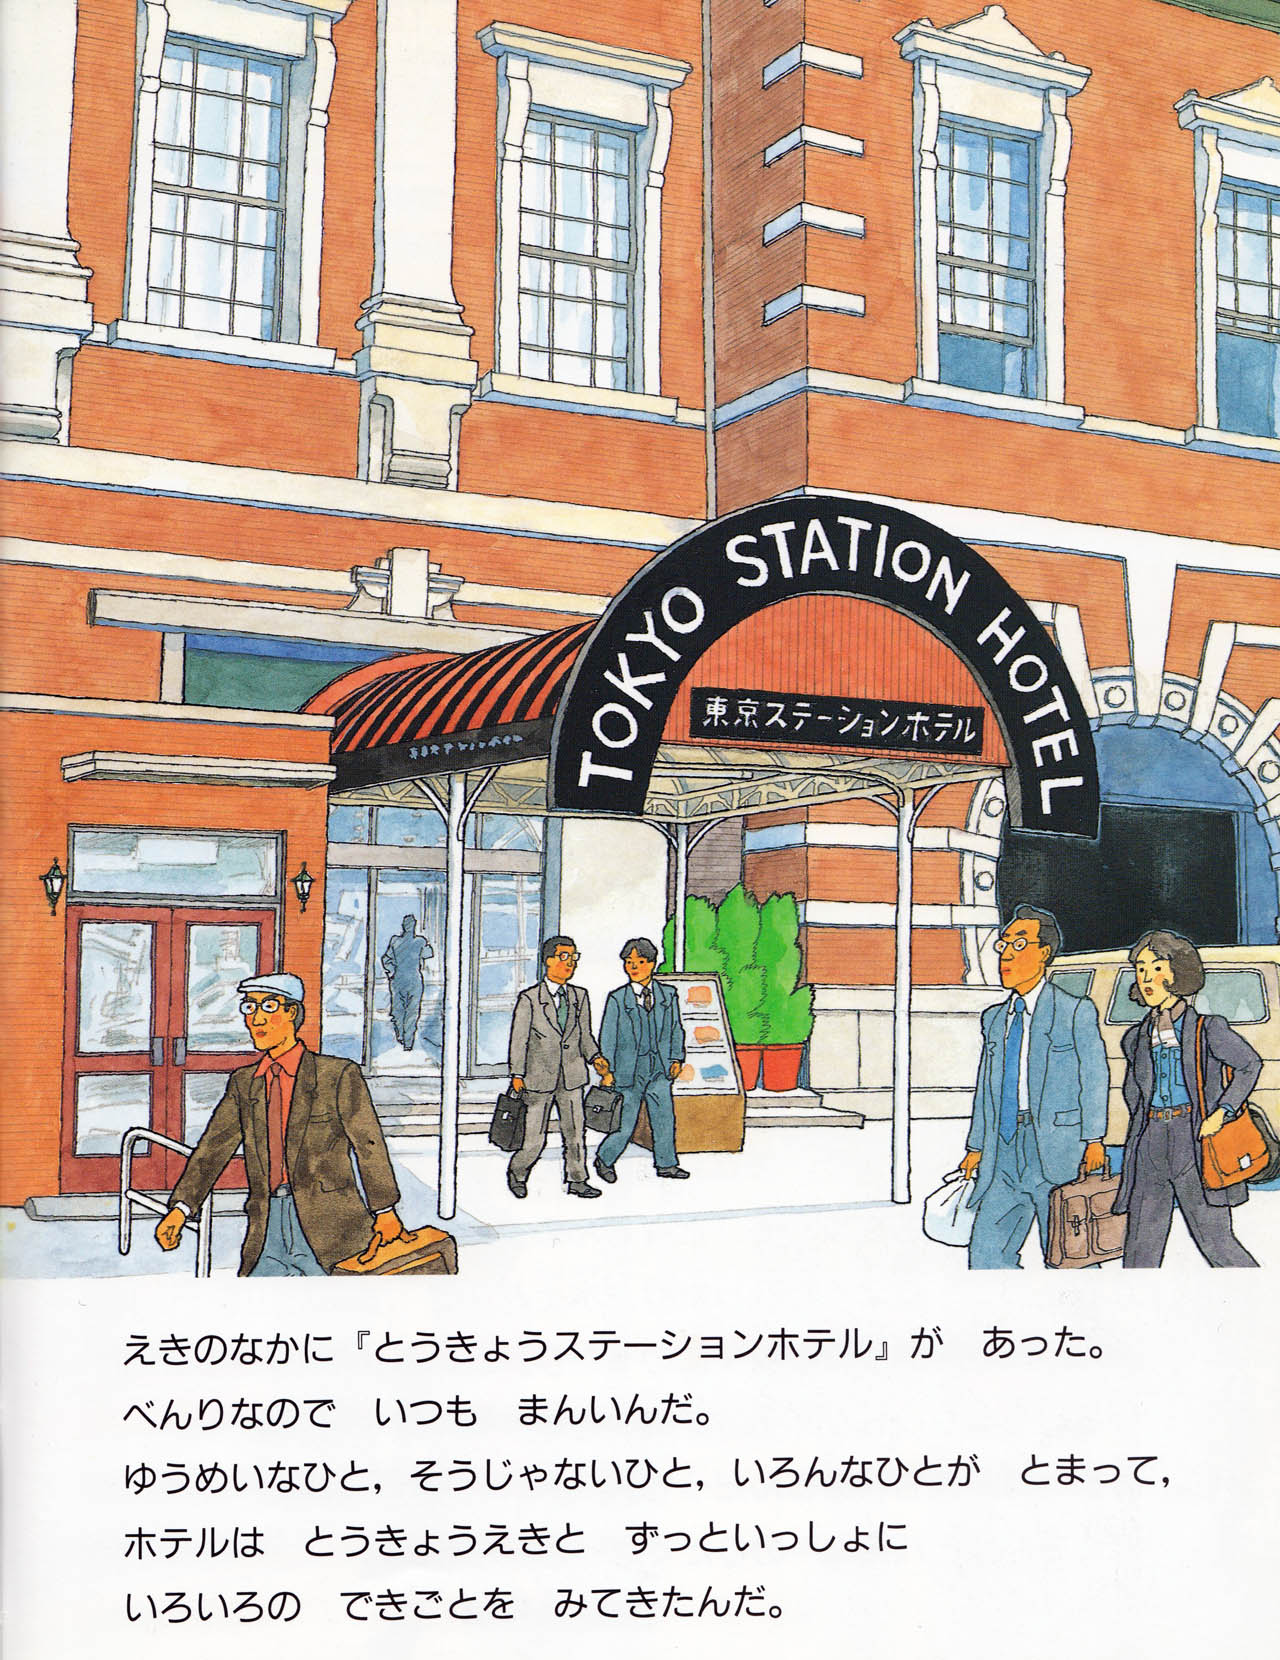 Japan-in-Berlin-The-Tokyo-Station-Hotel-100-Jahre-Kinderbuch